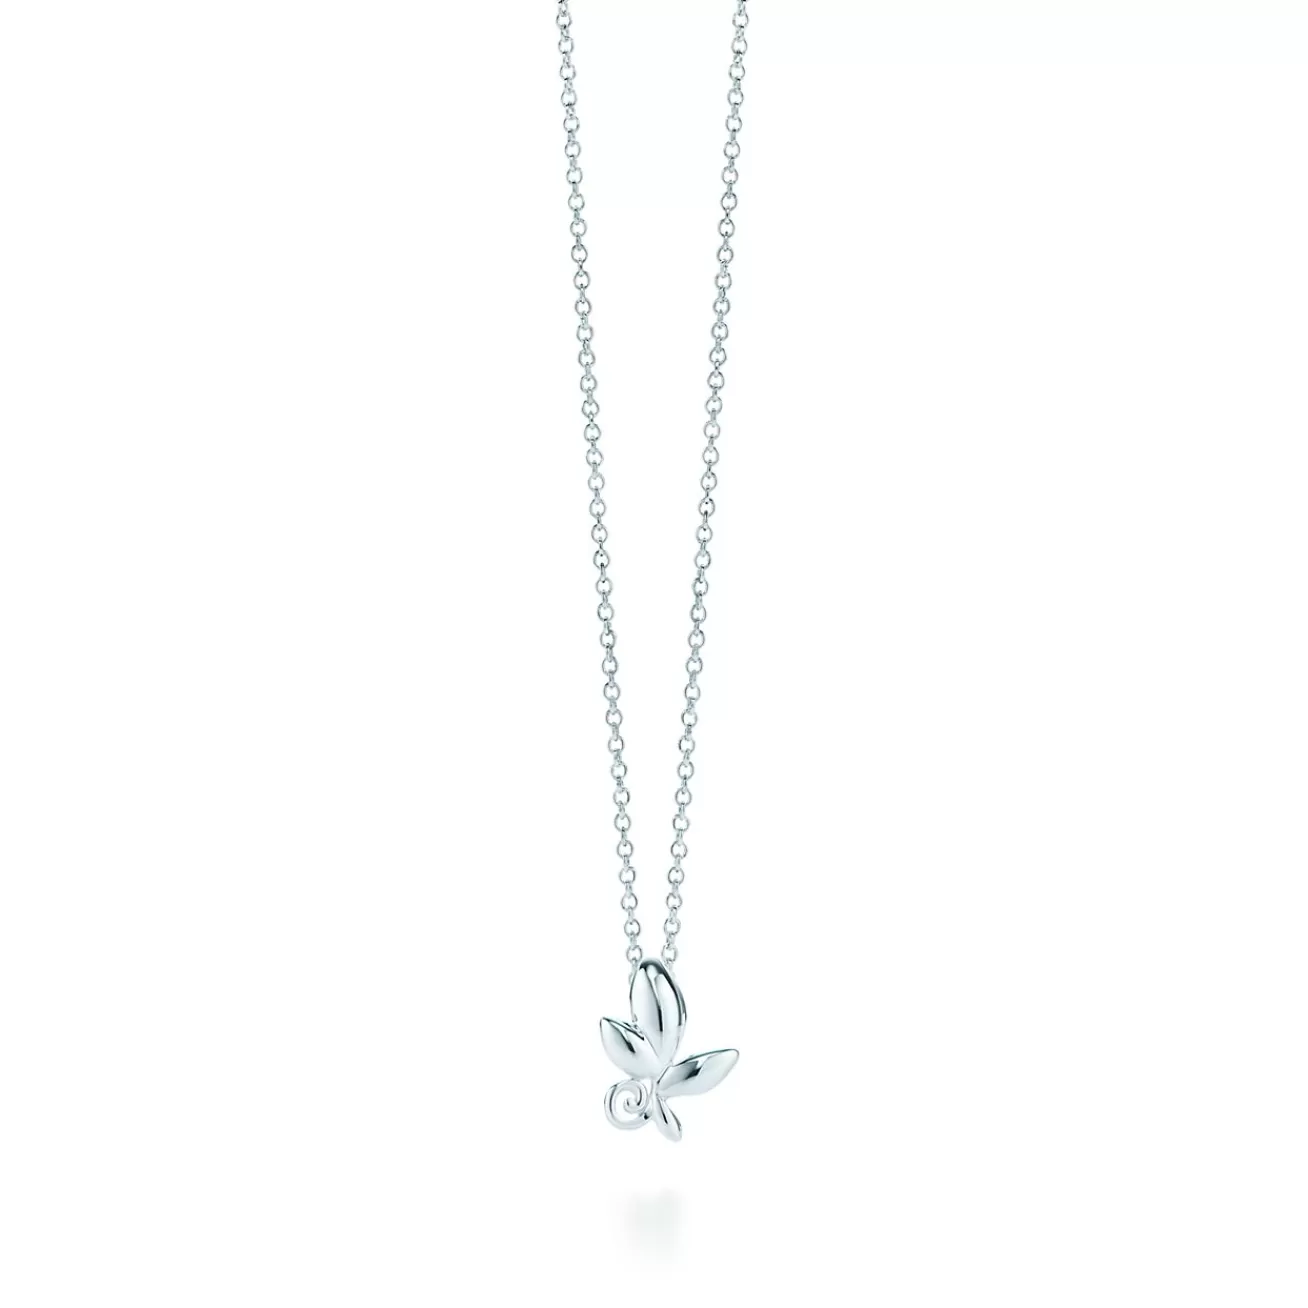 Tiffany & Co. Paloma Picasso® Olive Leaf pendant in sterling silver, mini. | ^ Necklaces & Pendants | Sterling Silver Jewelry